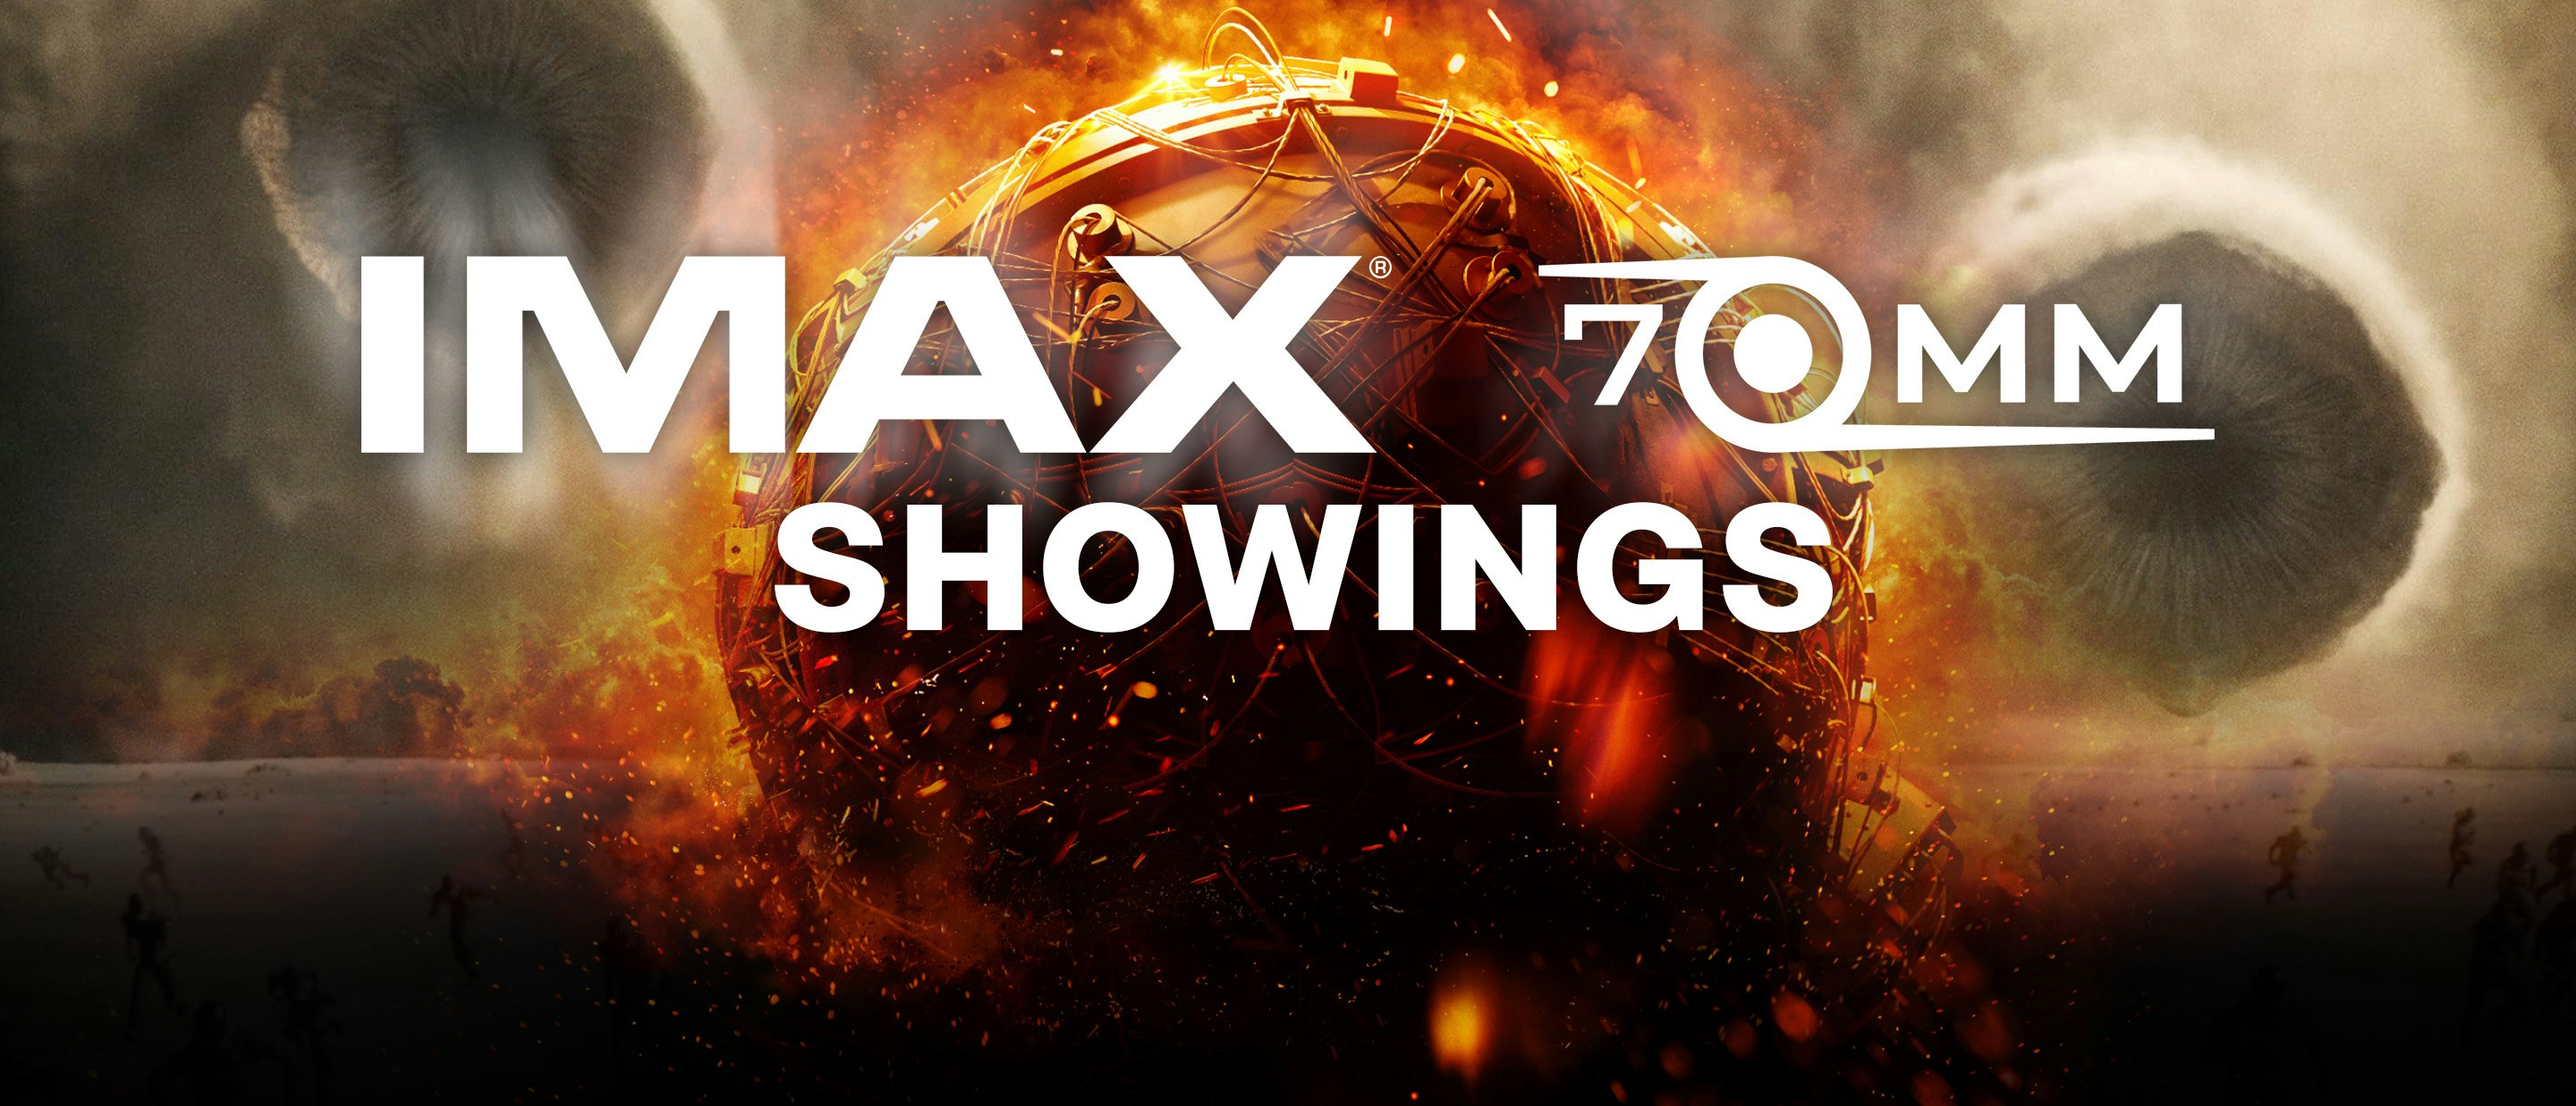 IMAX 70MM Showings